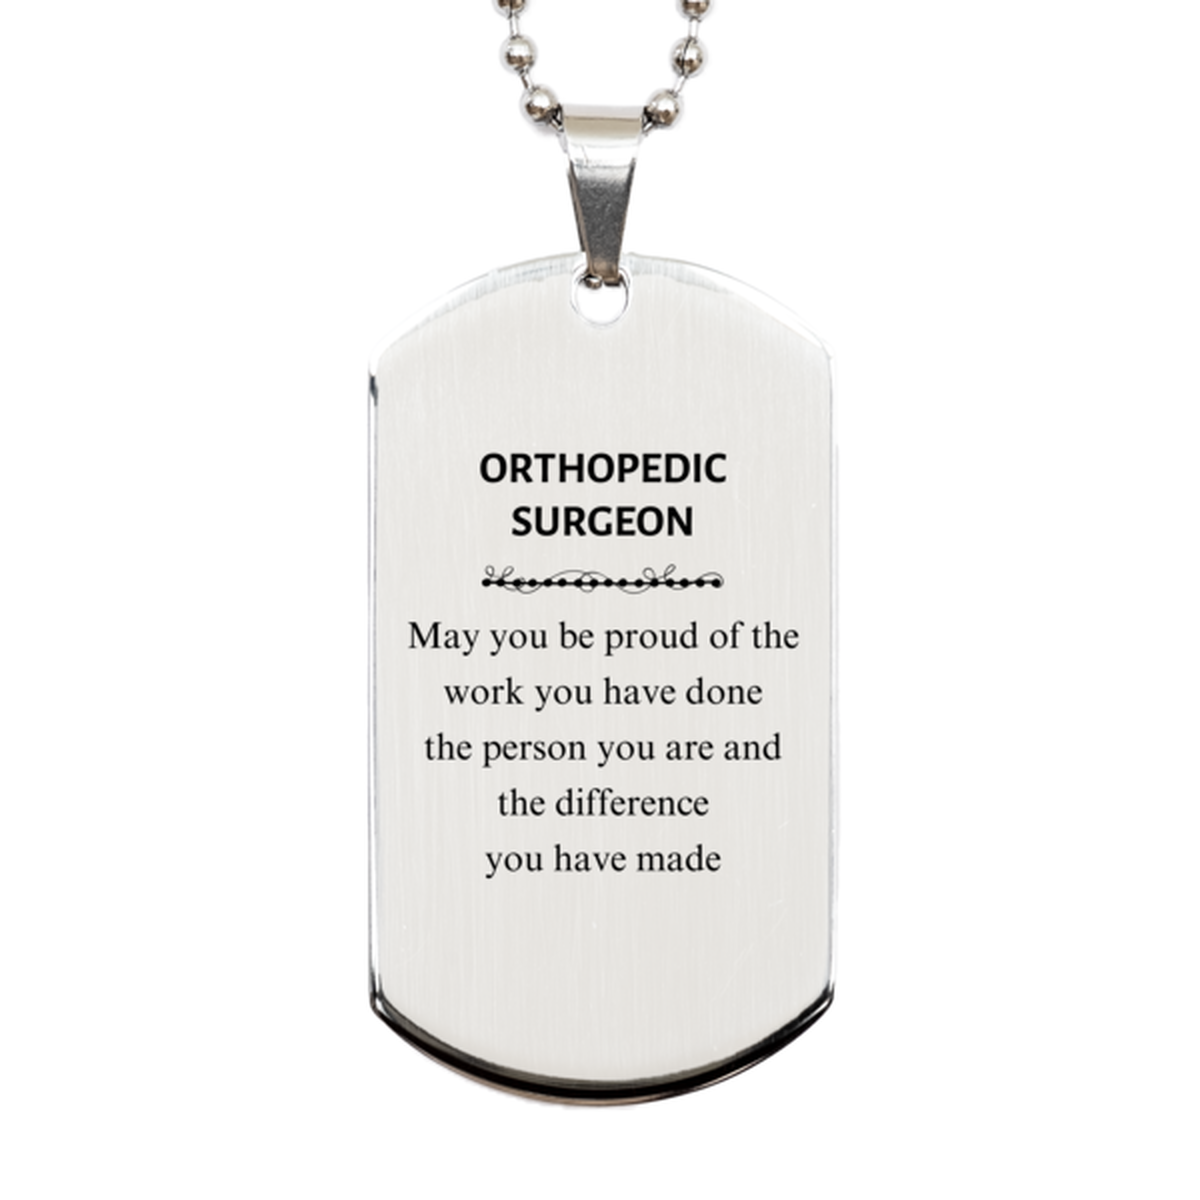 Orthopedic Surgeon May you be proud of the work you have done, Retirement Orthopedic Surgeon Silver Dog Tag for Colleague Appreciation Gifts Amazing for Orthopedic Surgeon